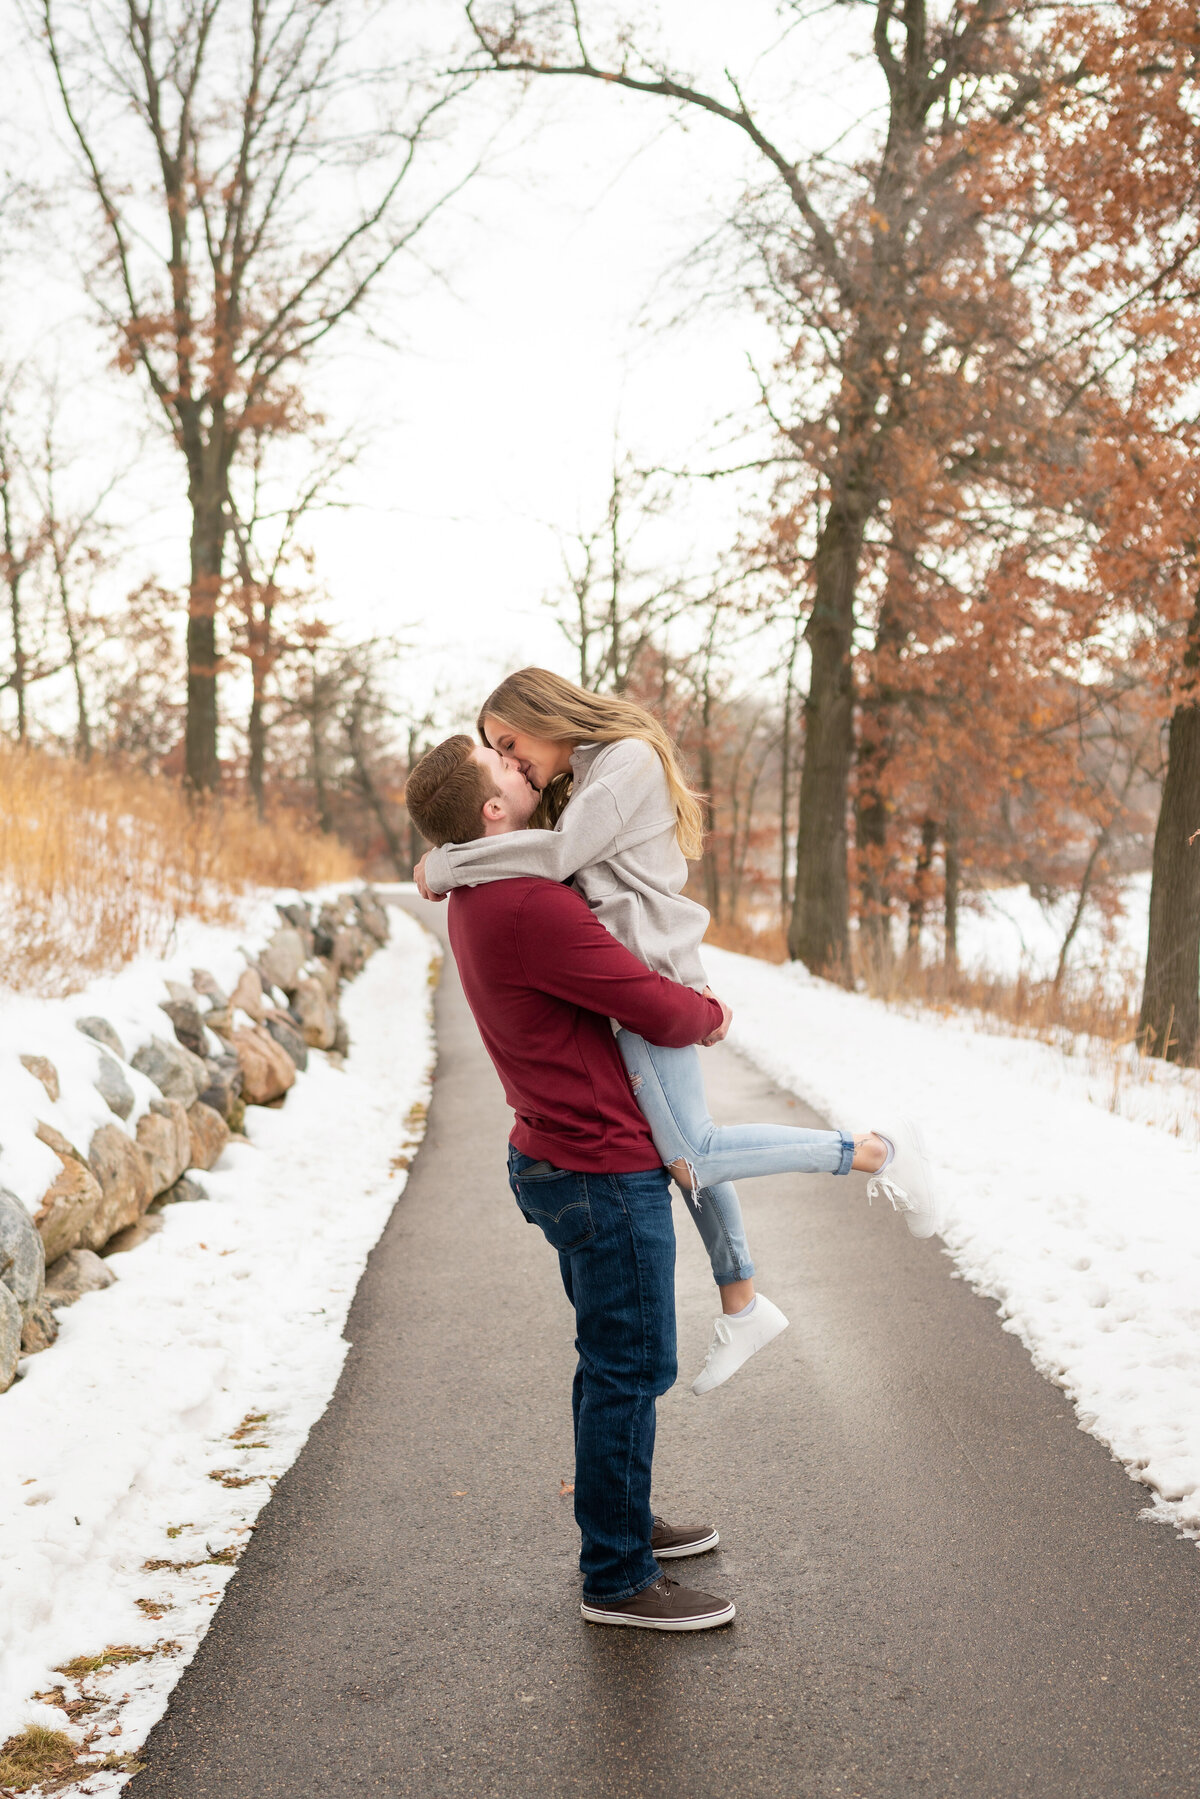 Man in jeans lifts woman in white sweater and kisses her surrounded by snow.